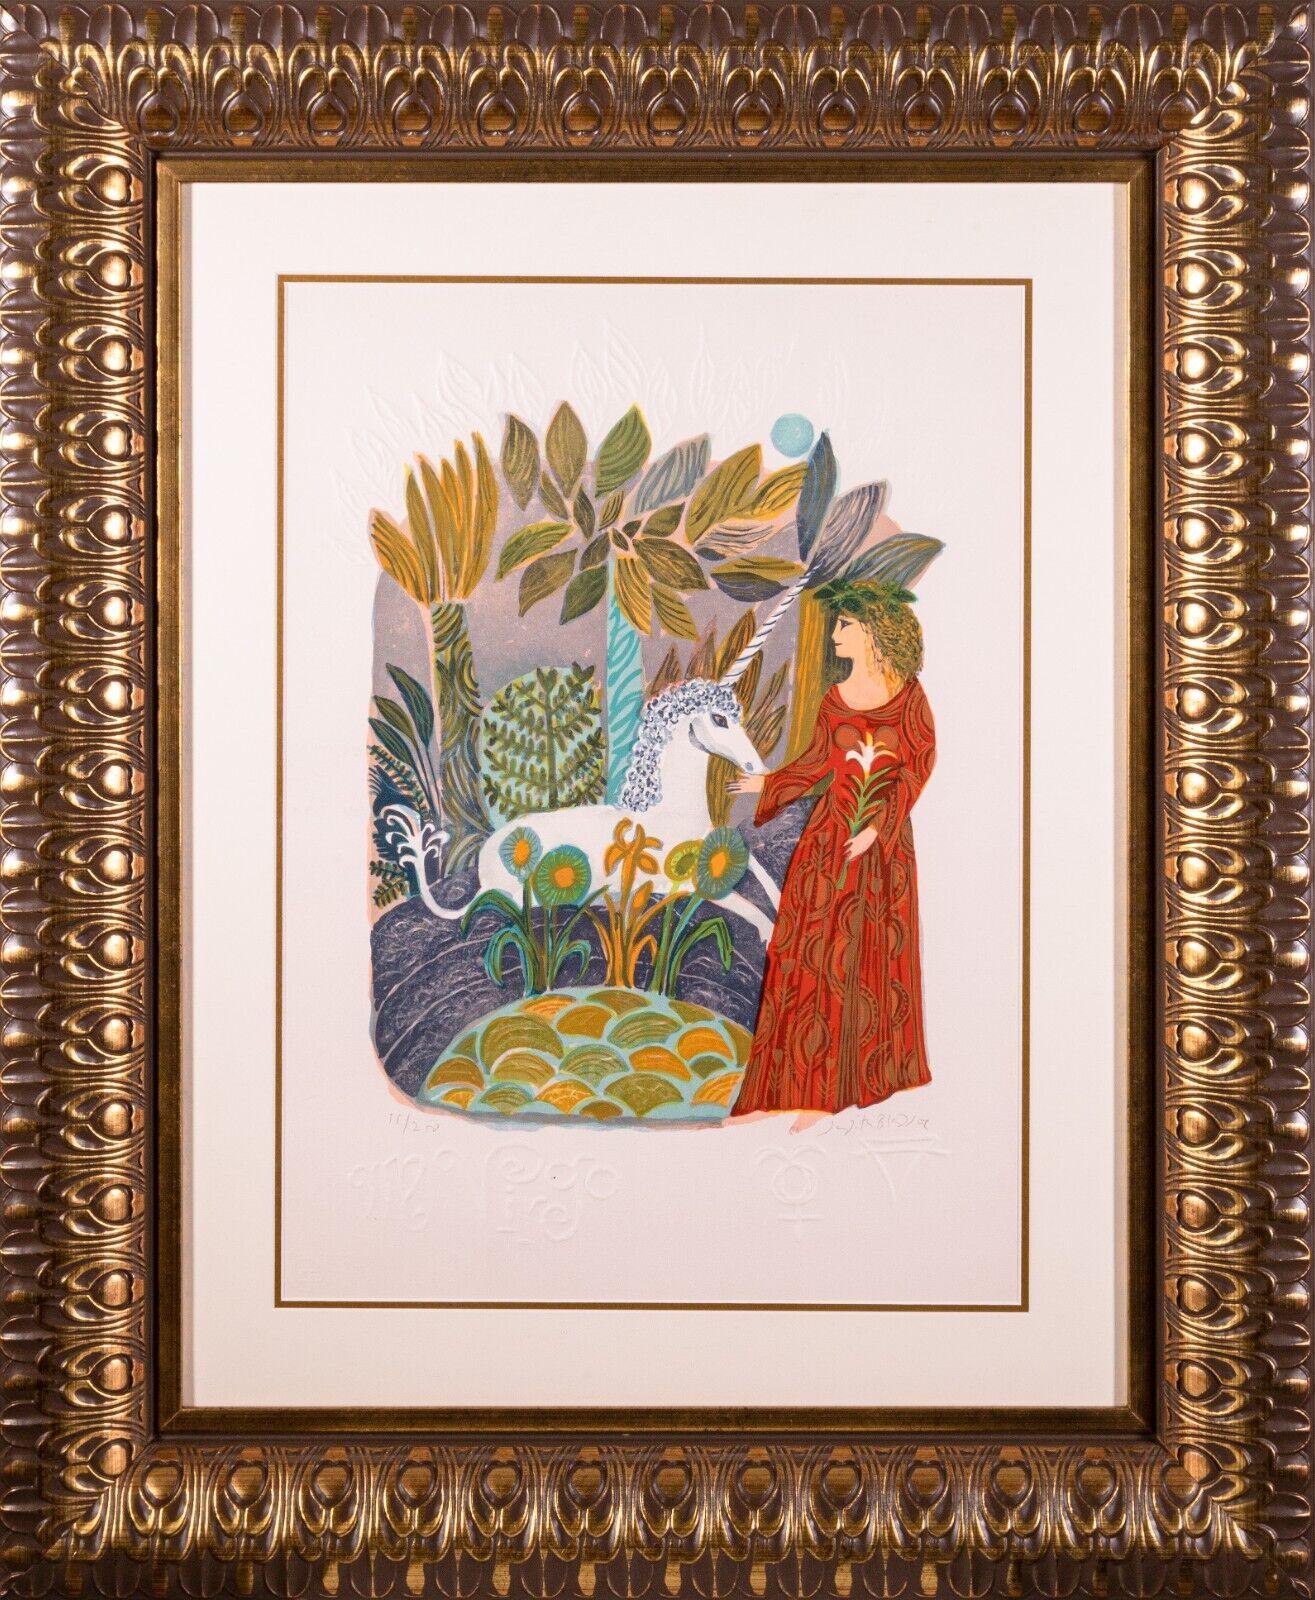 An imaginative and whimsical embossed lithograph titled 